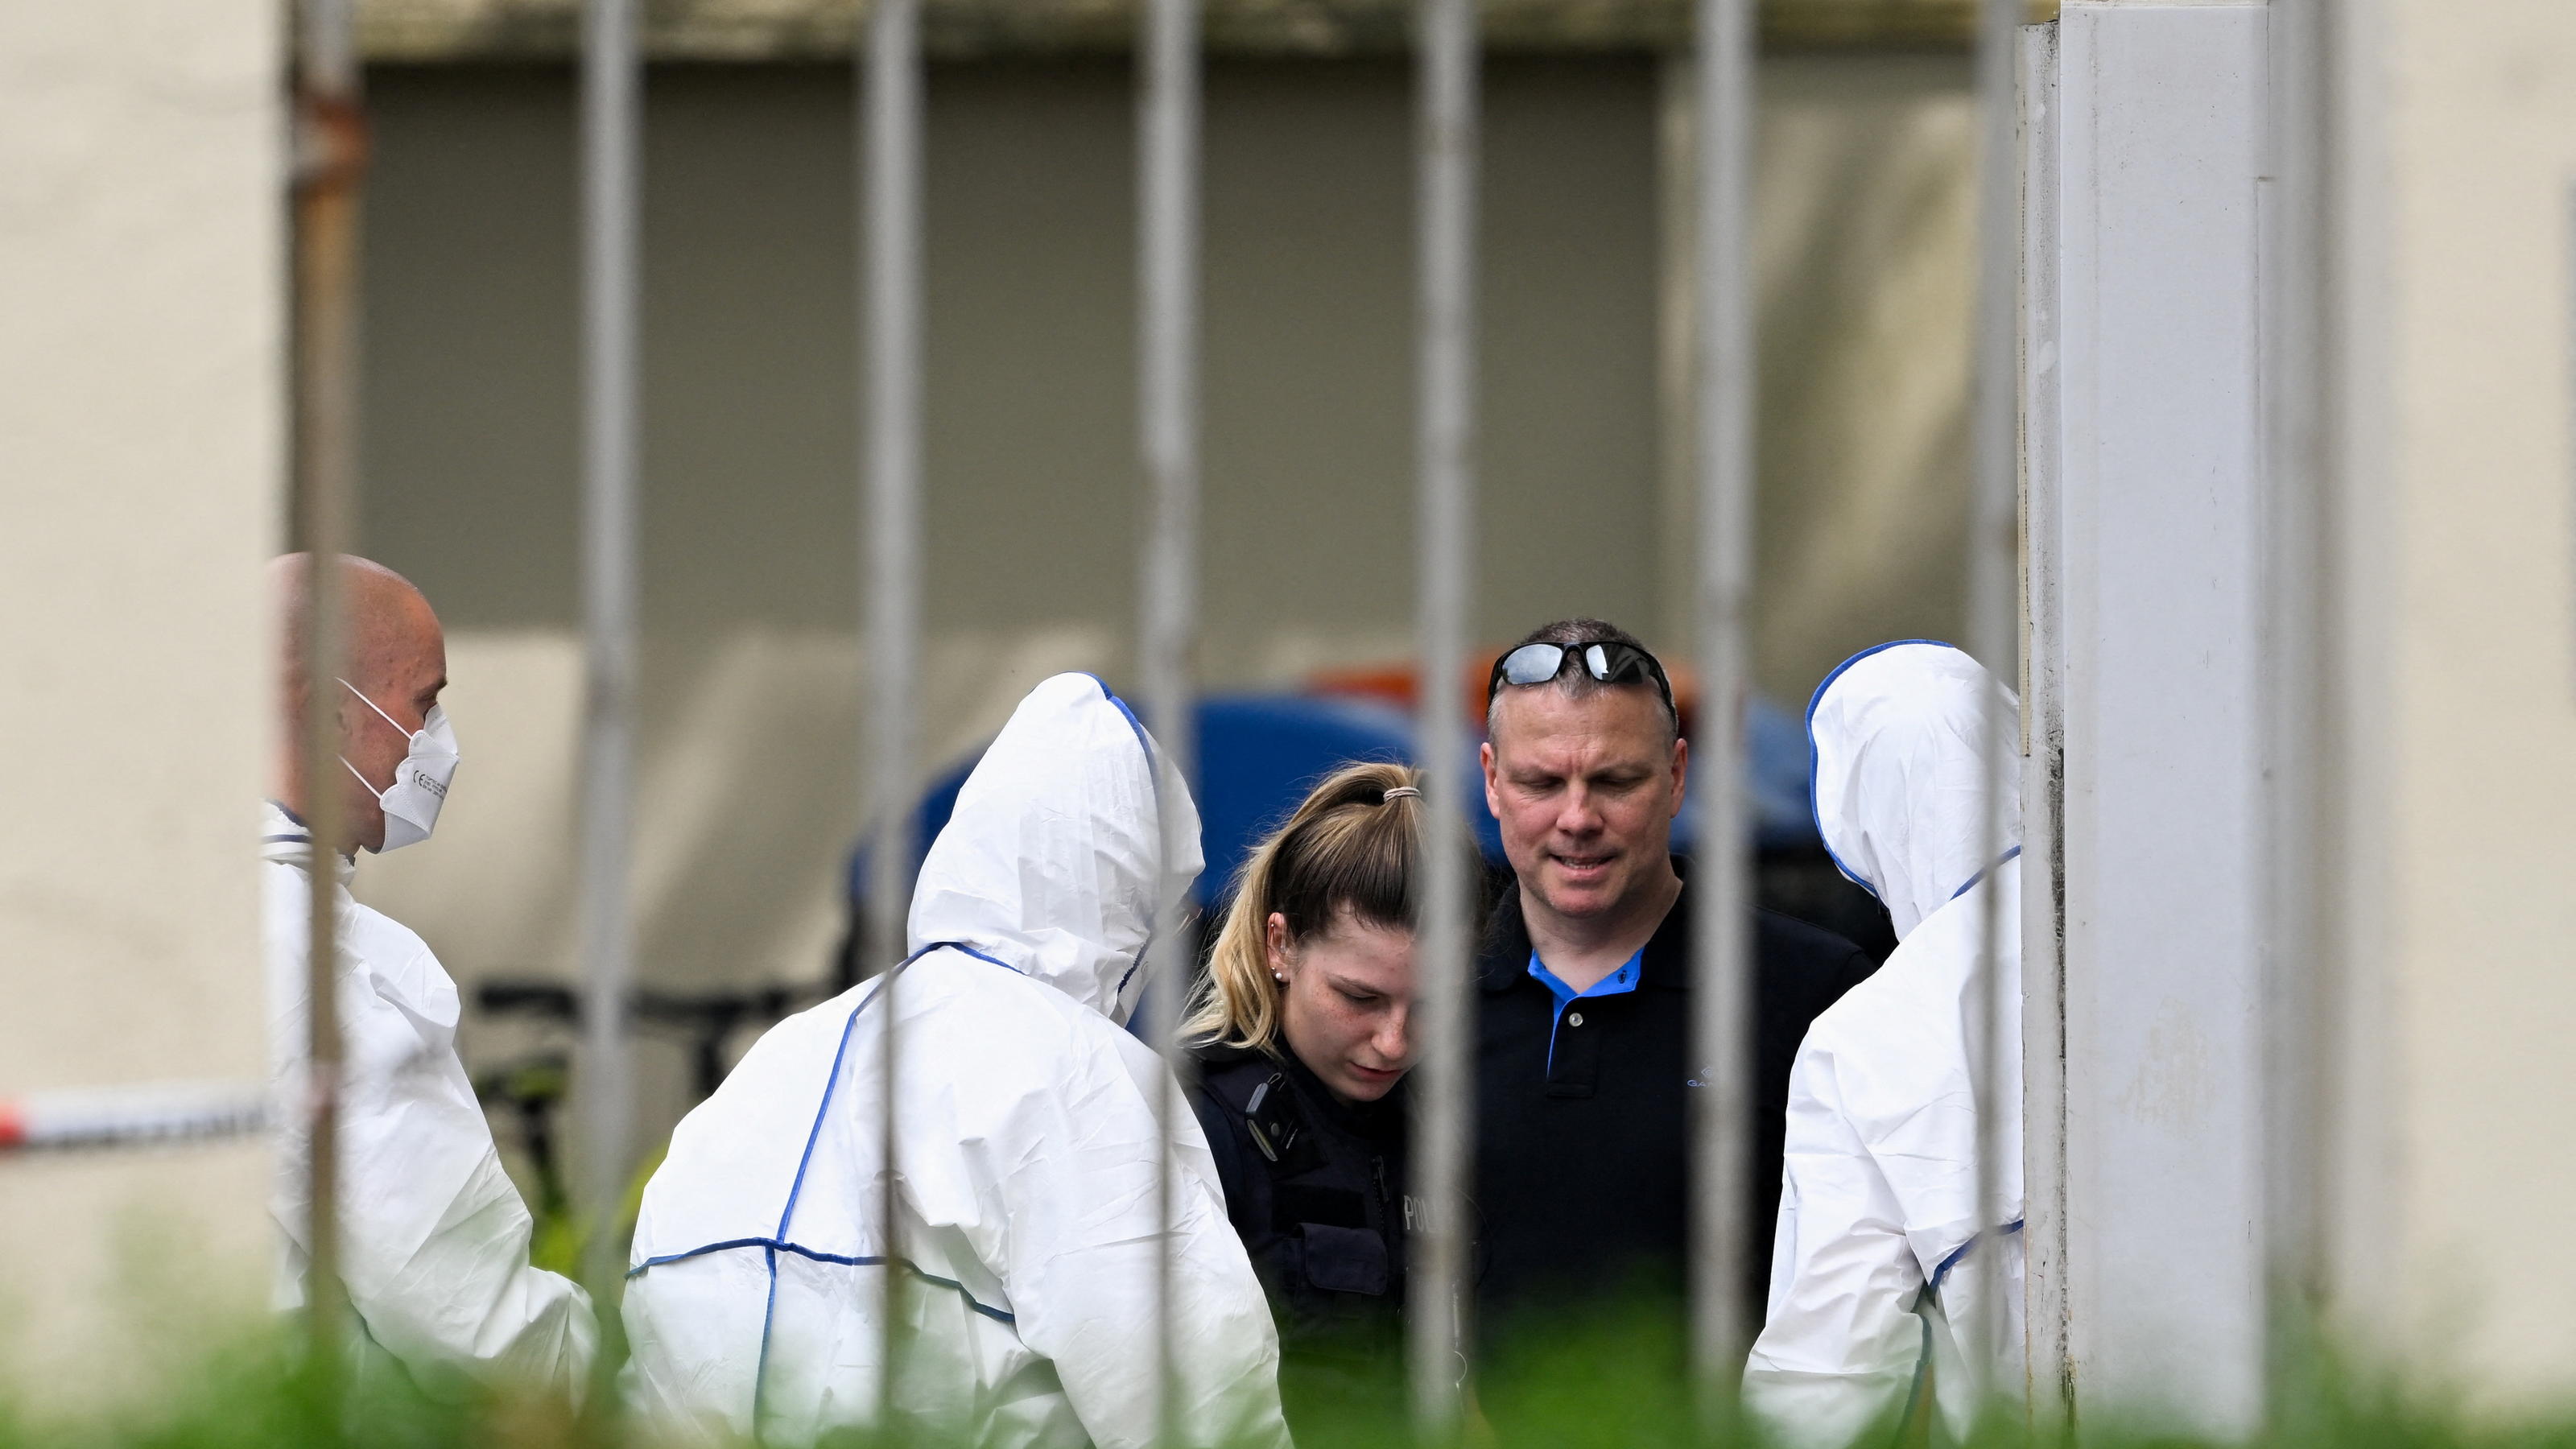 Forensic experts and police officers are seen near the building of a school where shots were fired, in the northern city of Bremerhaven, Germany, May 19, 2022. REUTERS/Fabian Bimmer